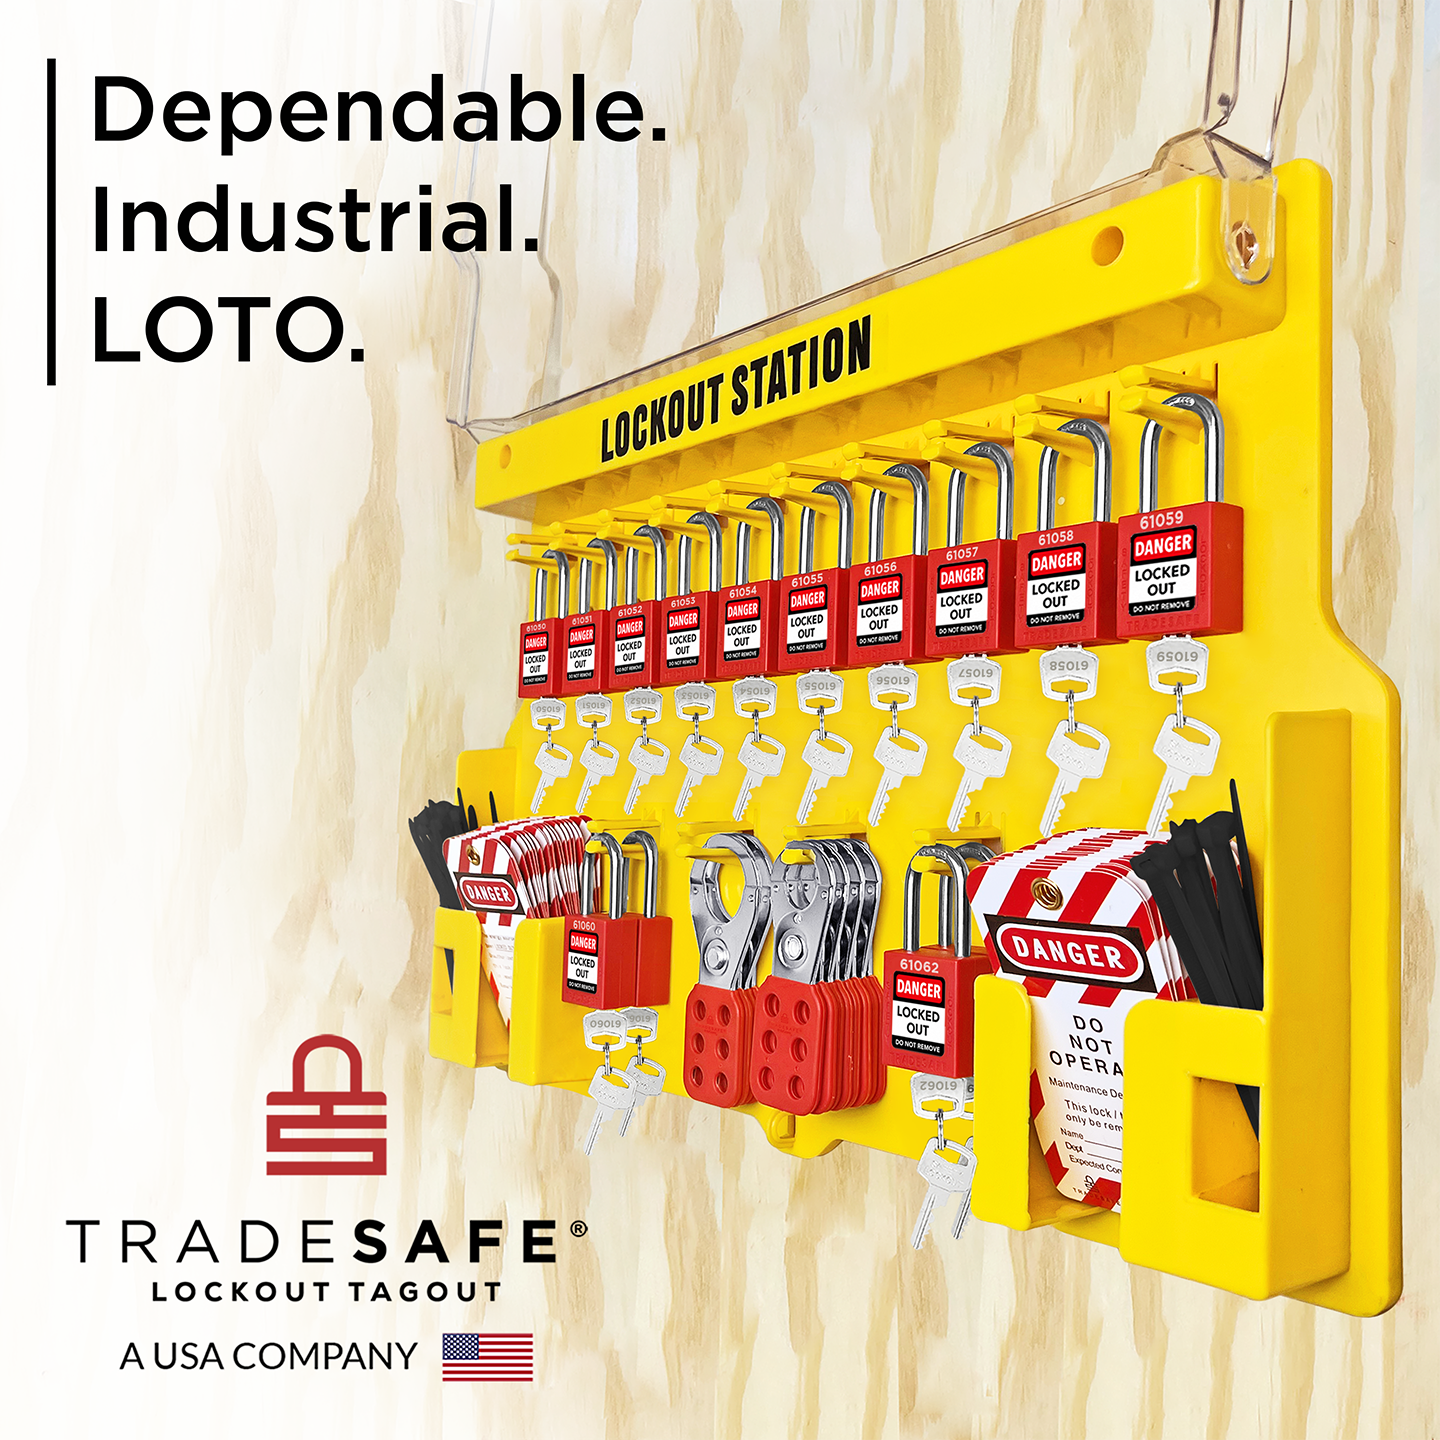 tradesafe: dependable. industrial. loto.